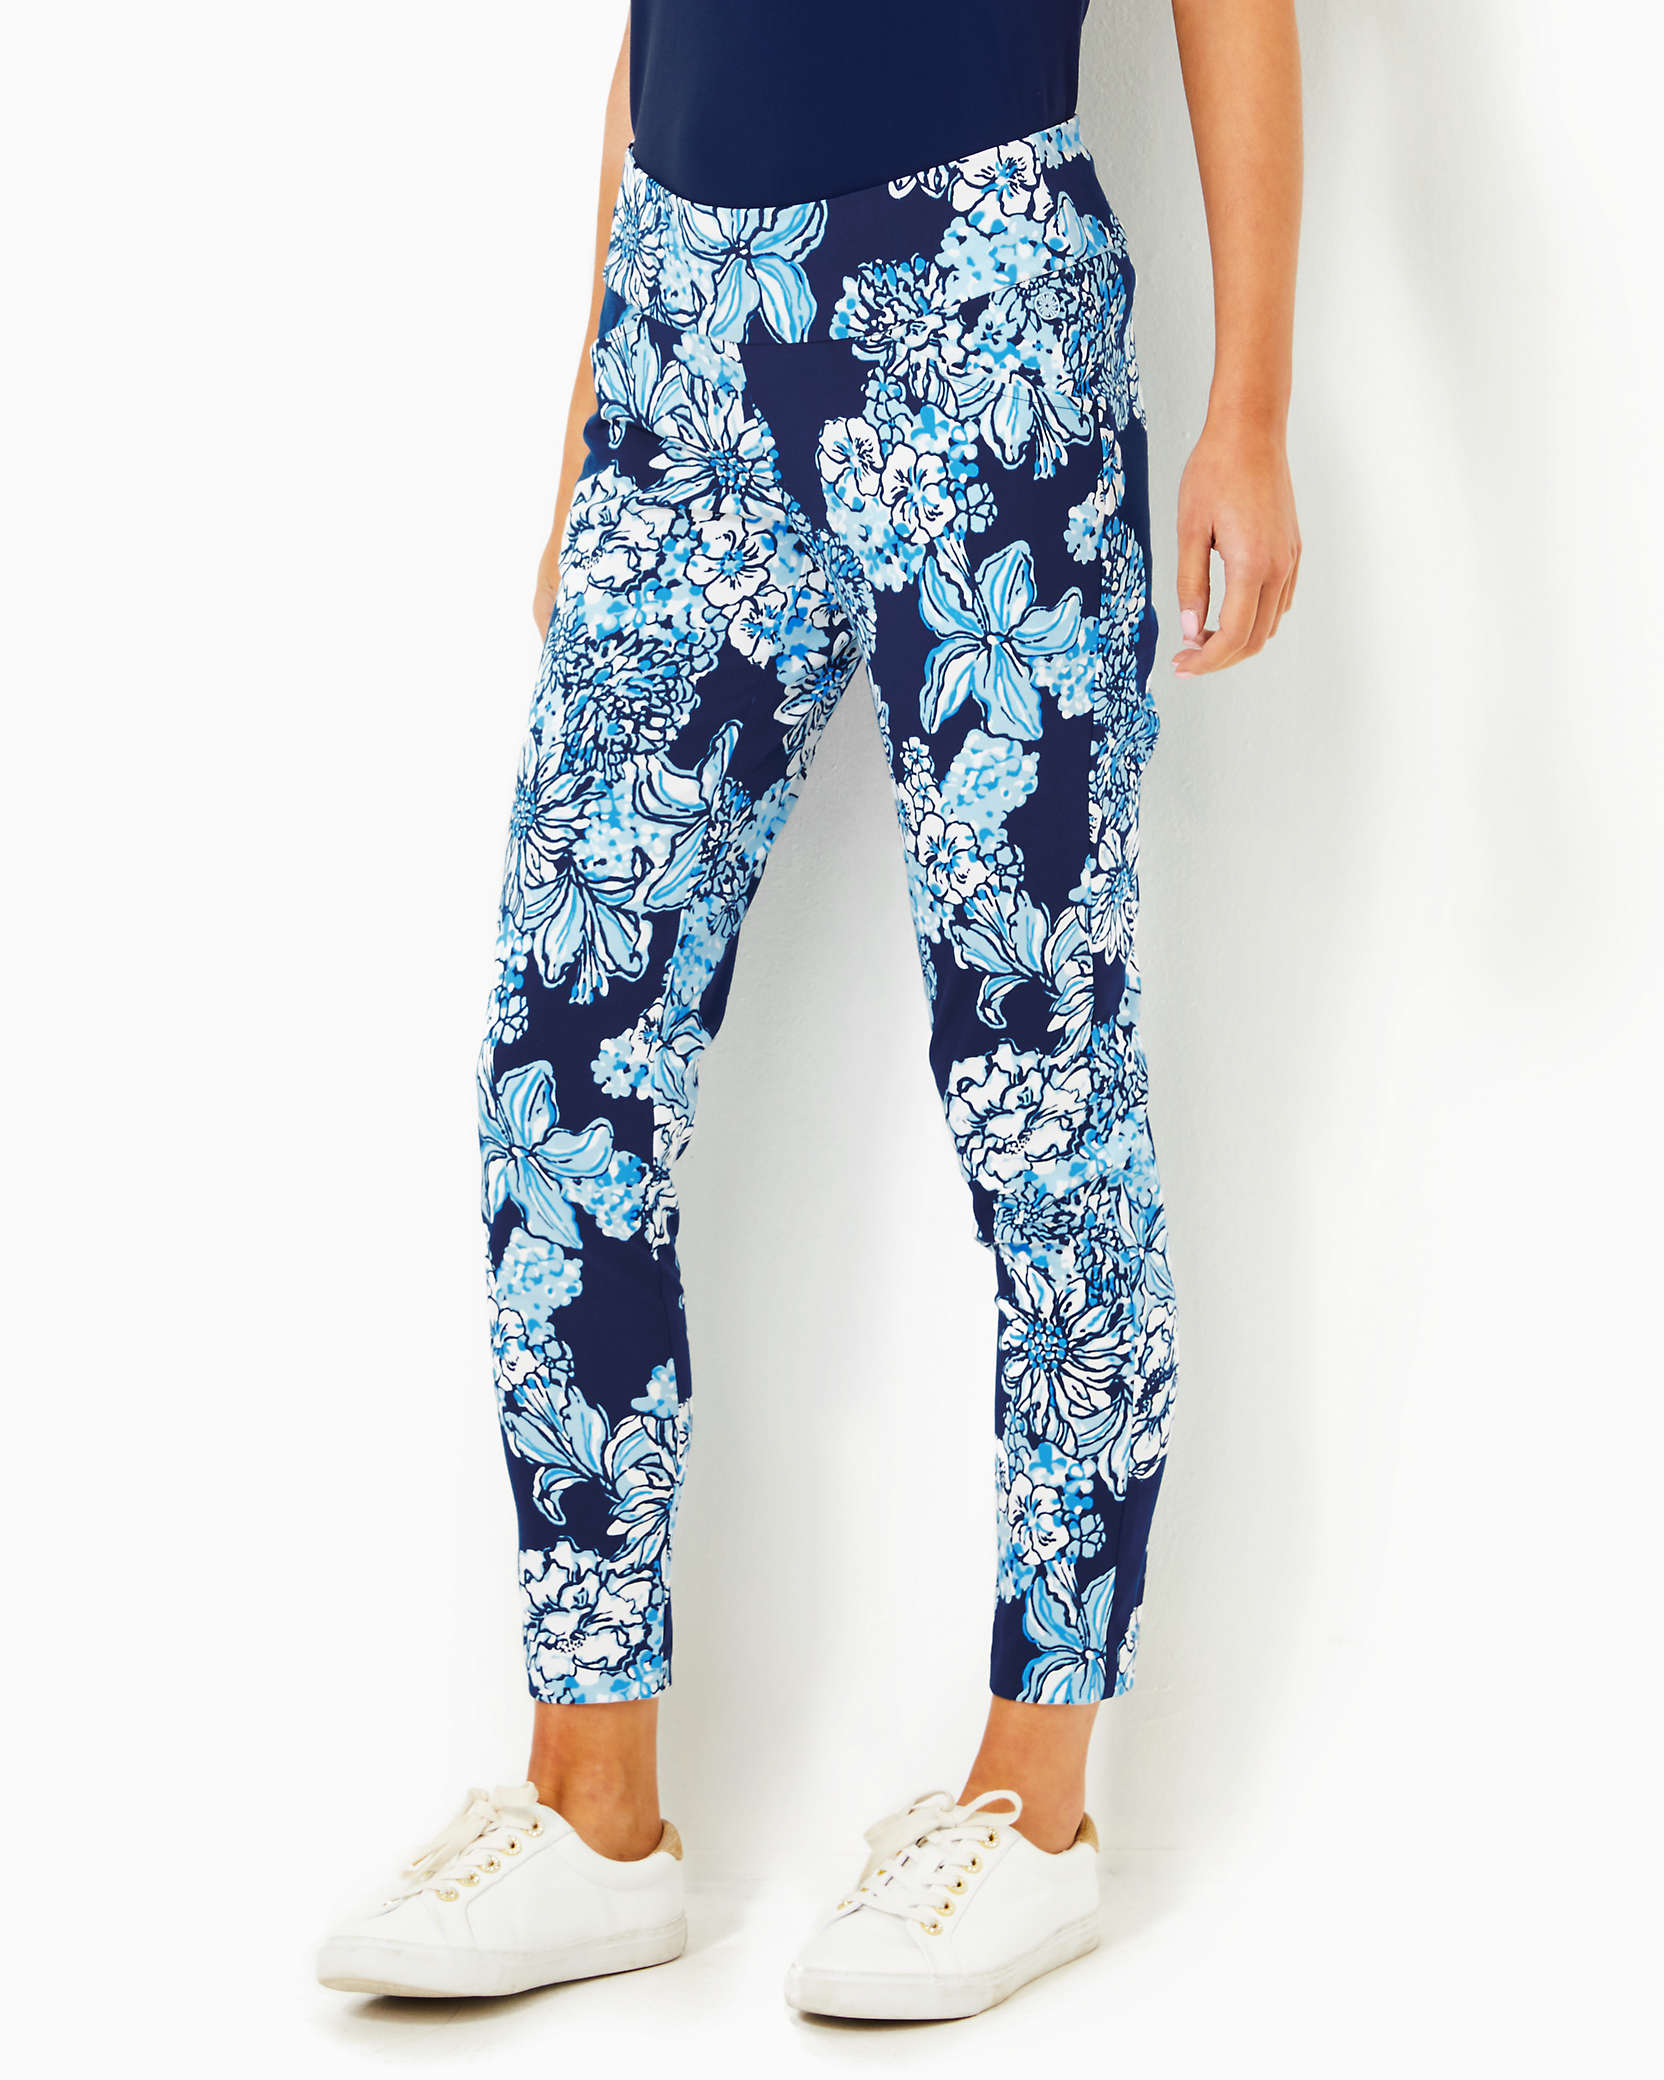 Shop Lilly Pulitzer Upf 50+ Luxletic 28" Corso Pant In Low Tide Navy Bouquet All Day Golf